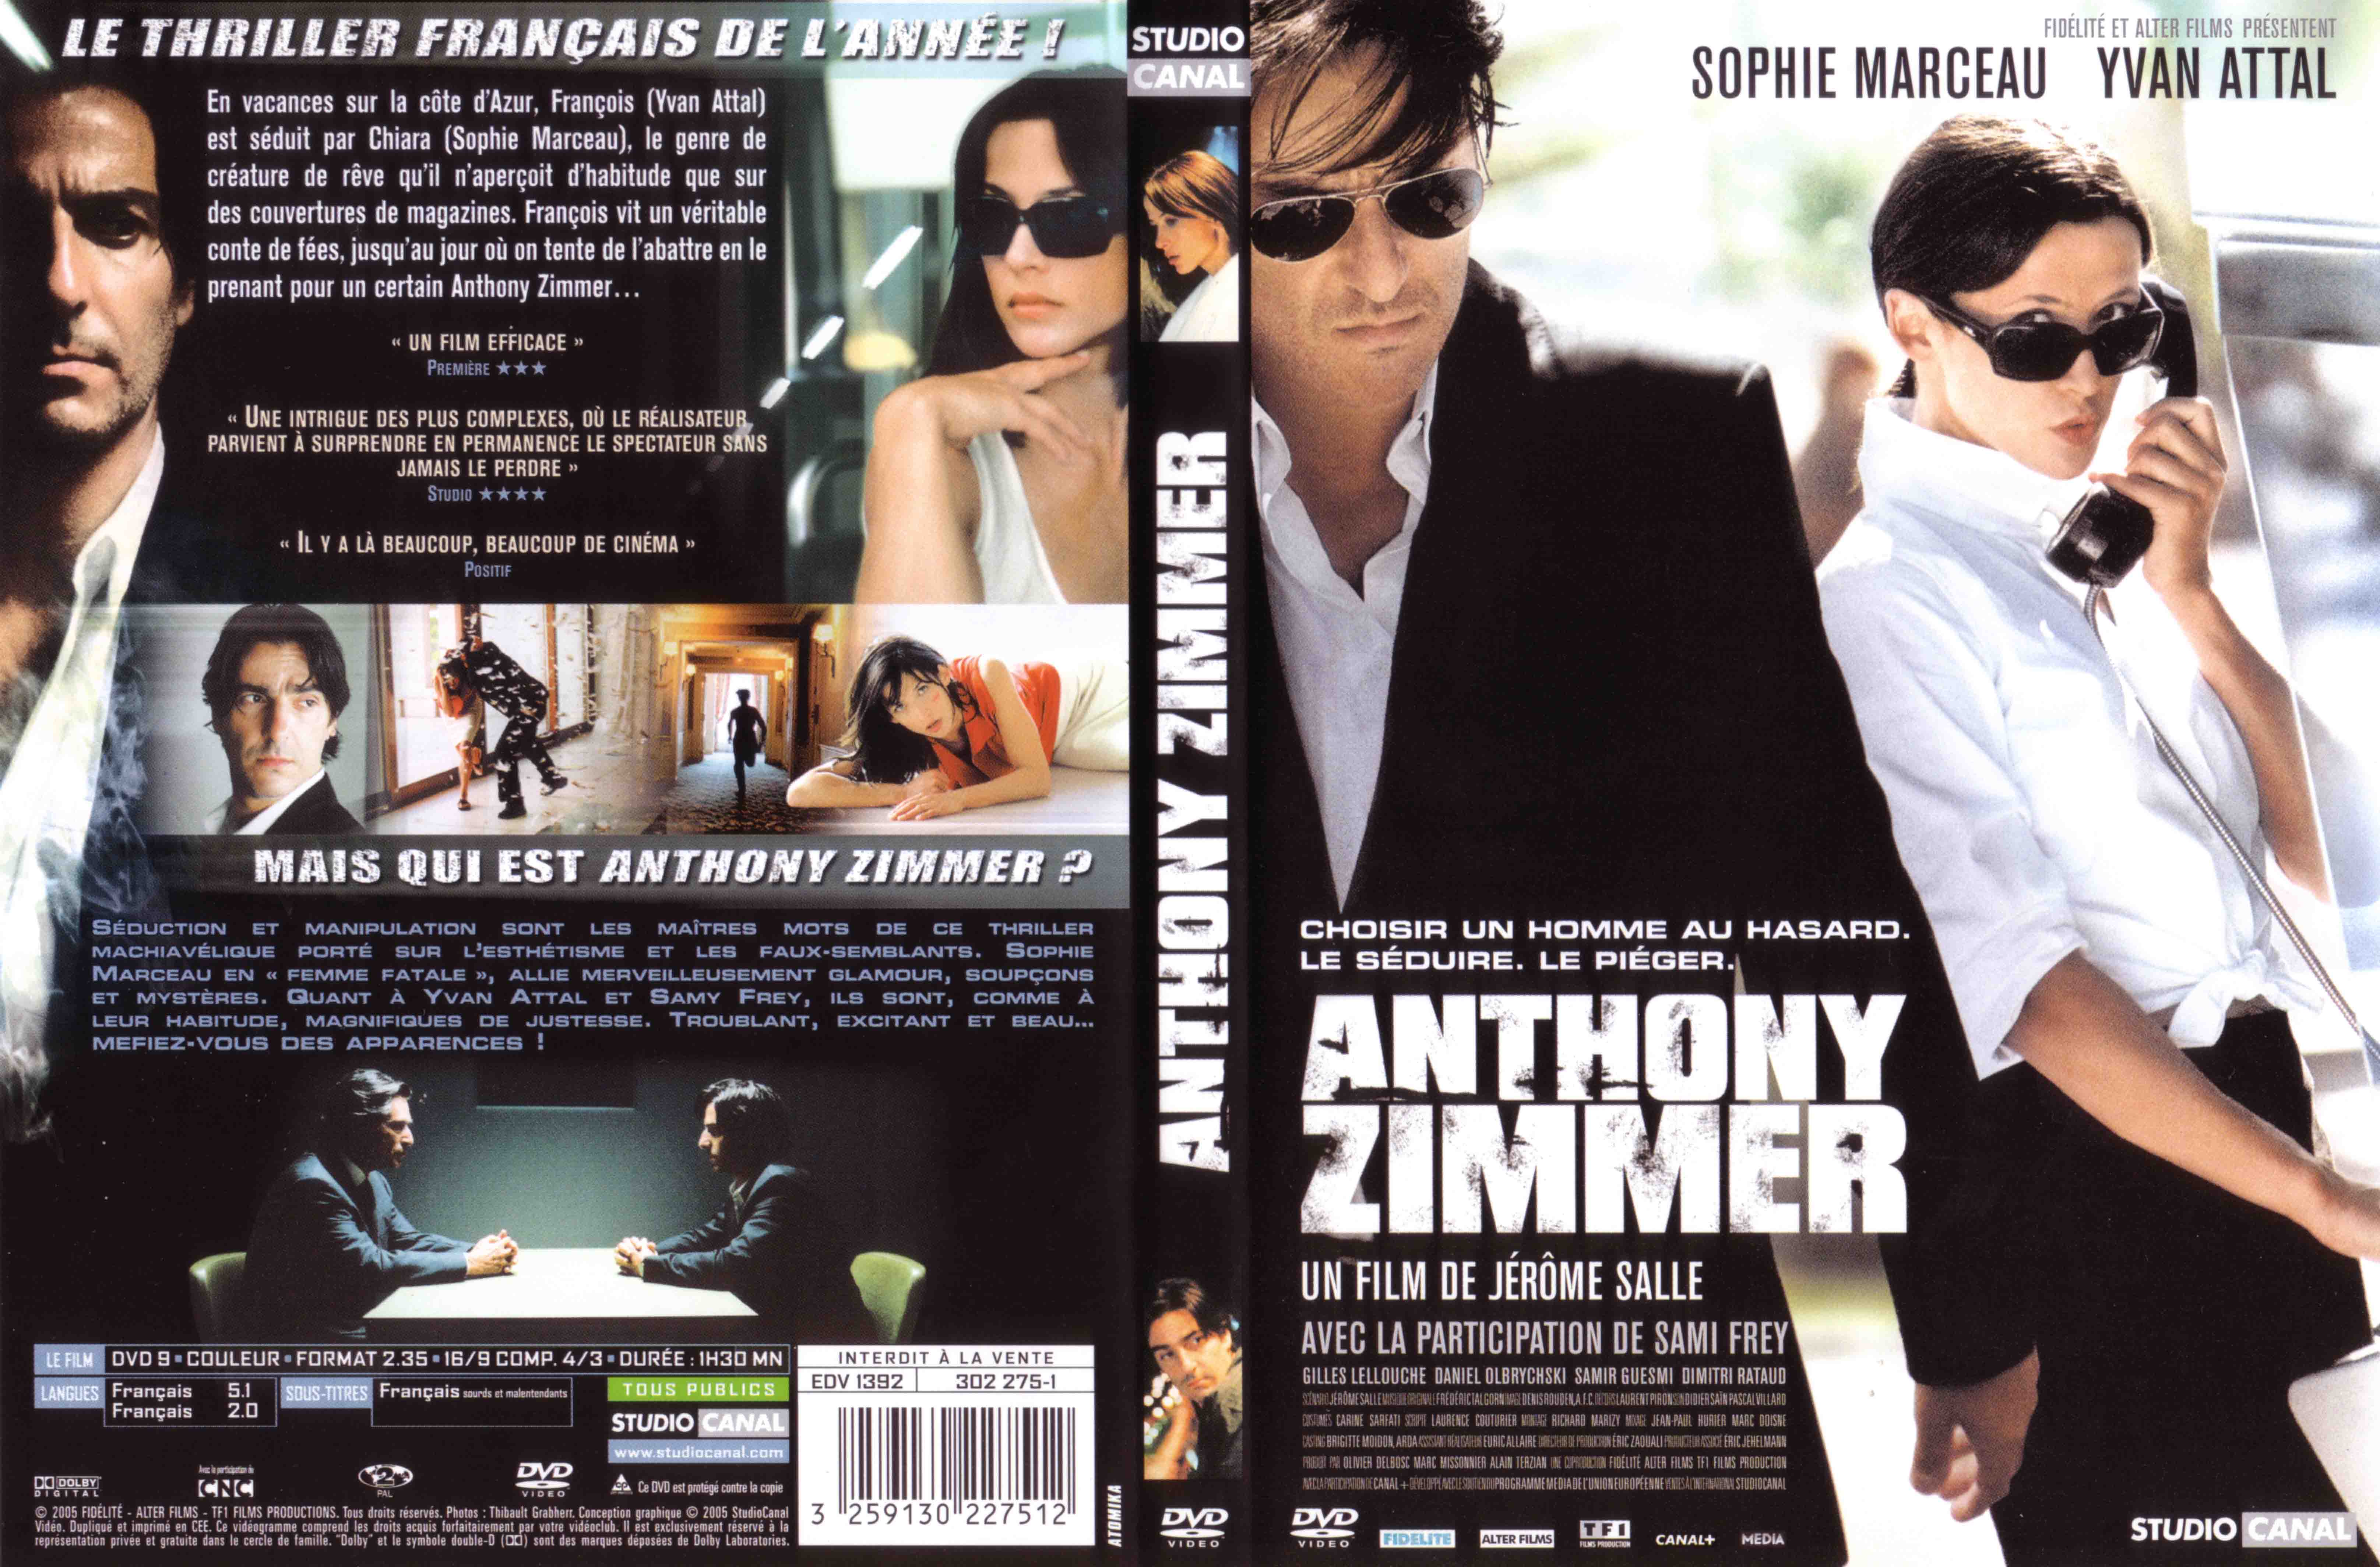 Jaquette DVD Anthony Zimmer